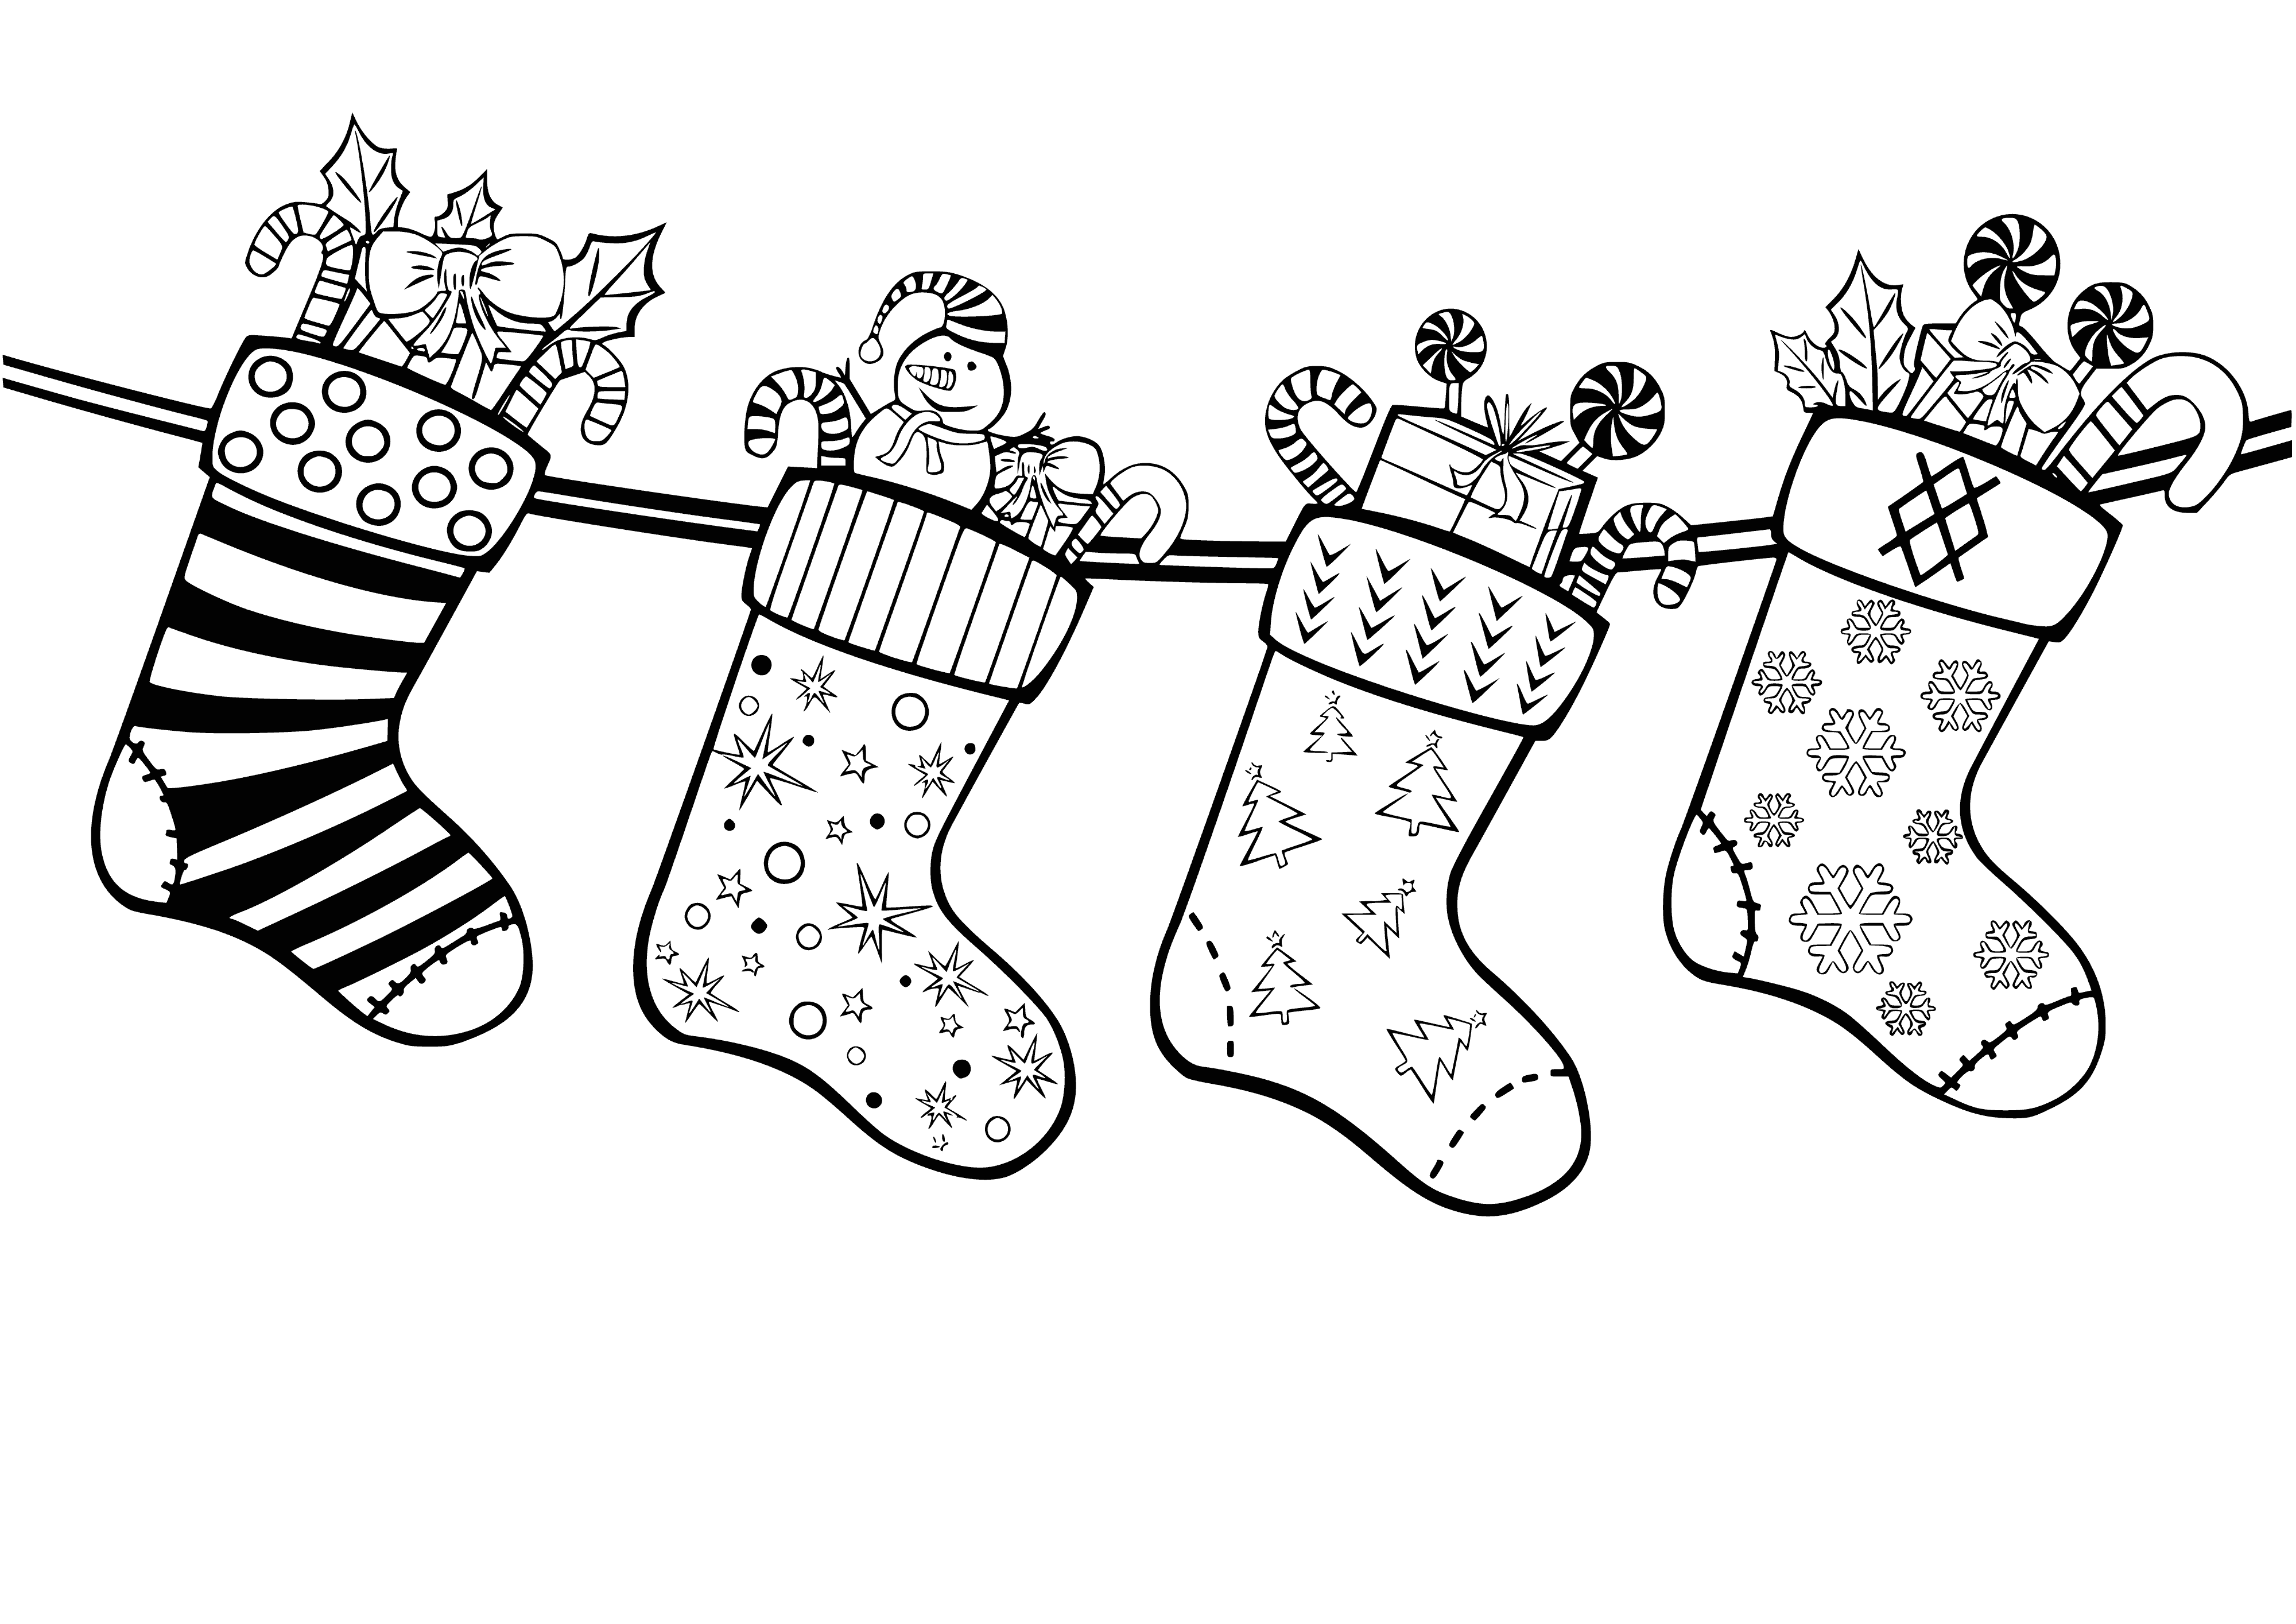 Christmas socks are festive red socks with white cuffs and snowflake designs! #HappyHolidays